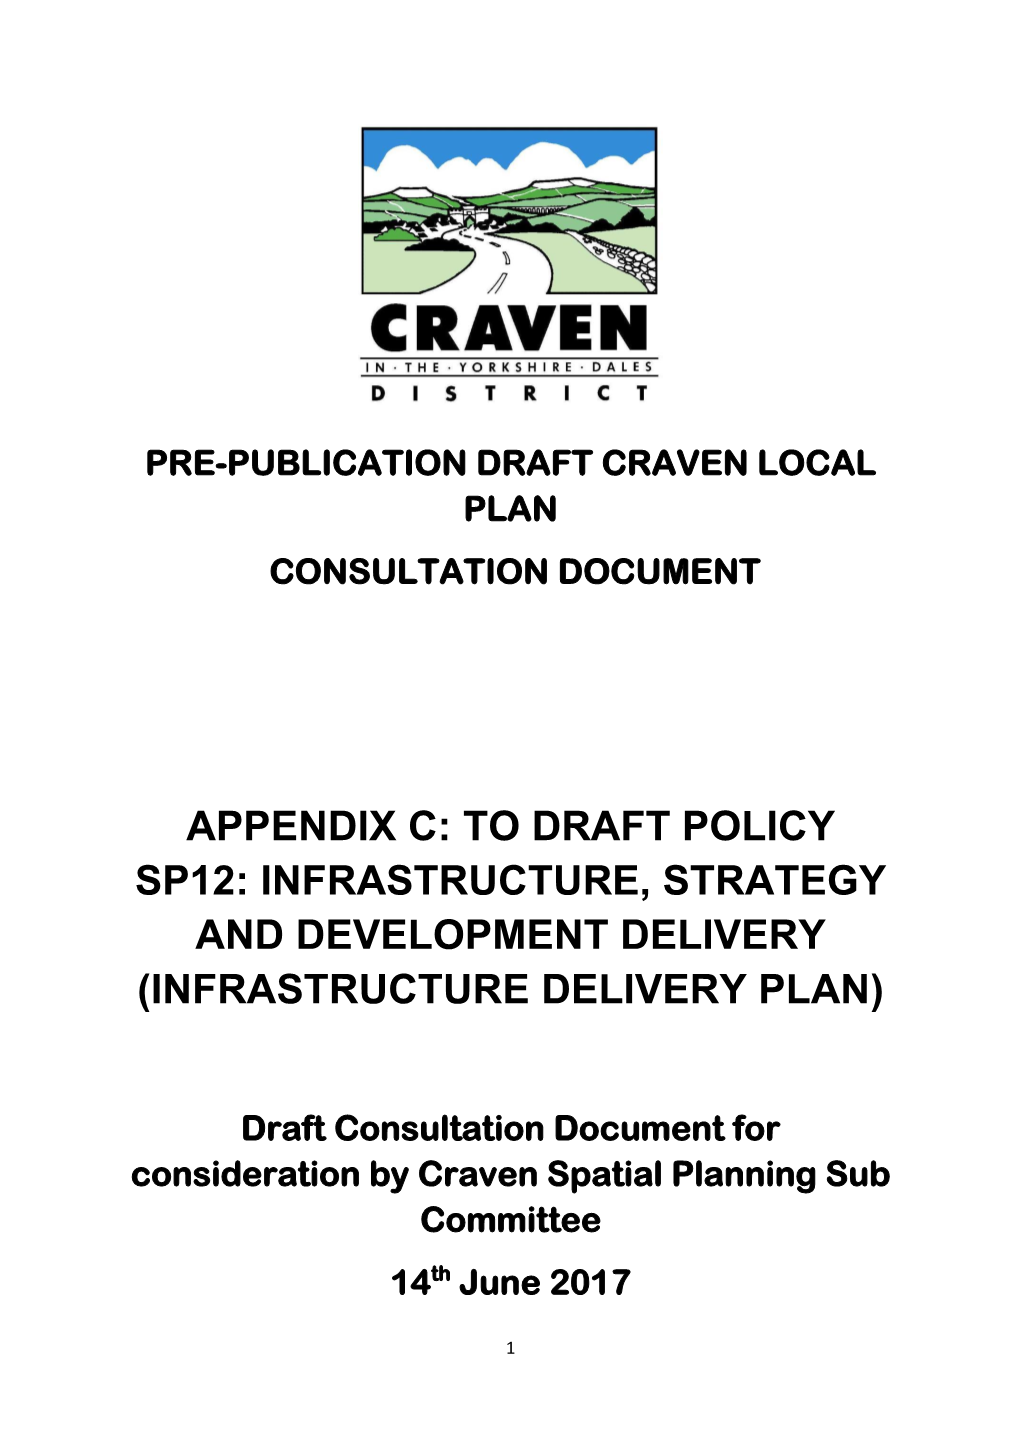 Appendix C: to Draft Policy Sp12: Infrastructure, Strategy and Development Delivery (Infrastructure Delivery Plan)